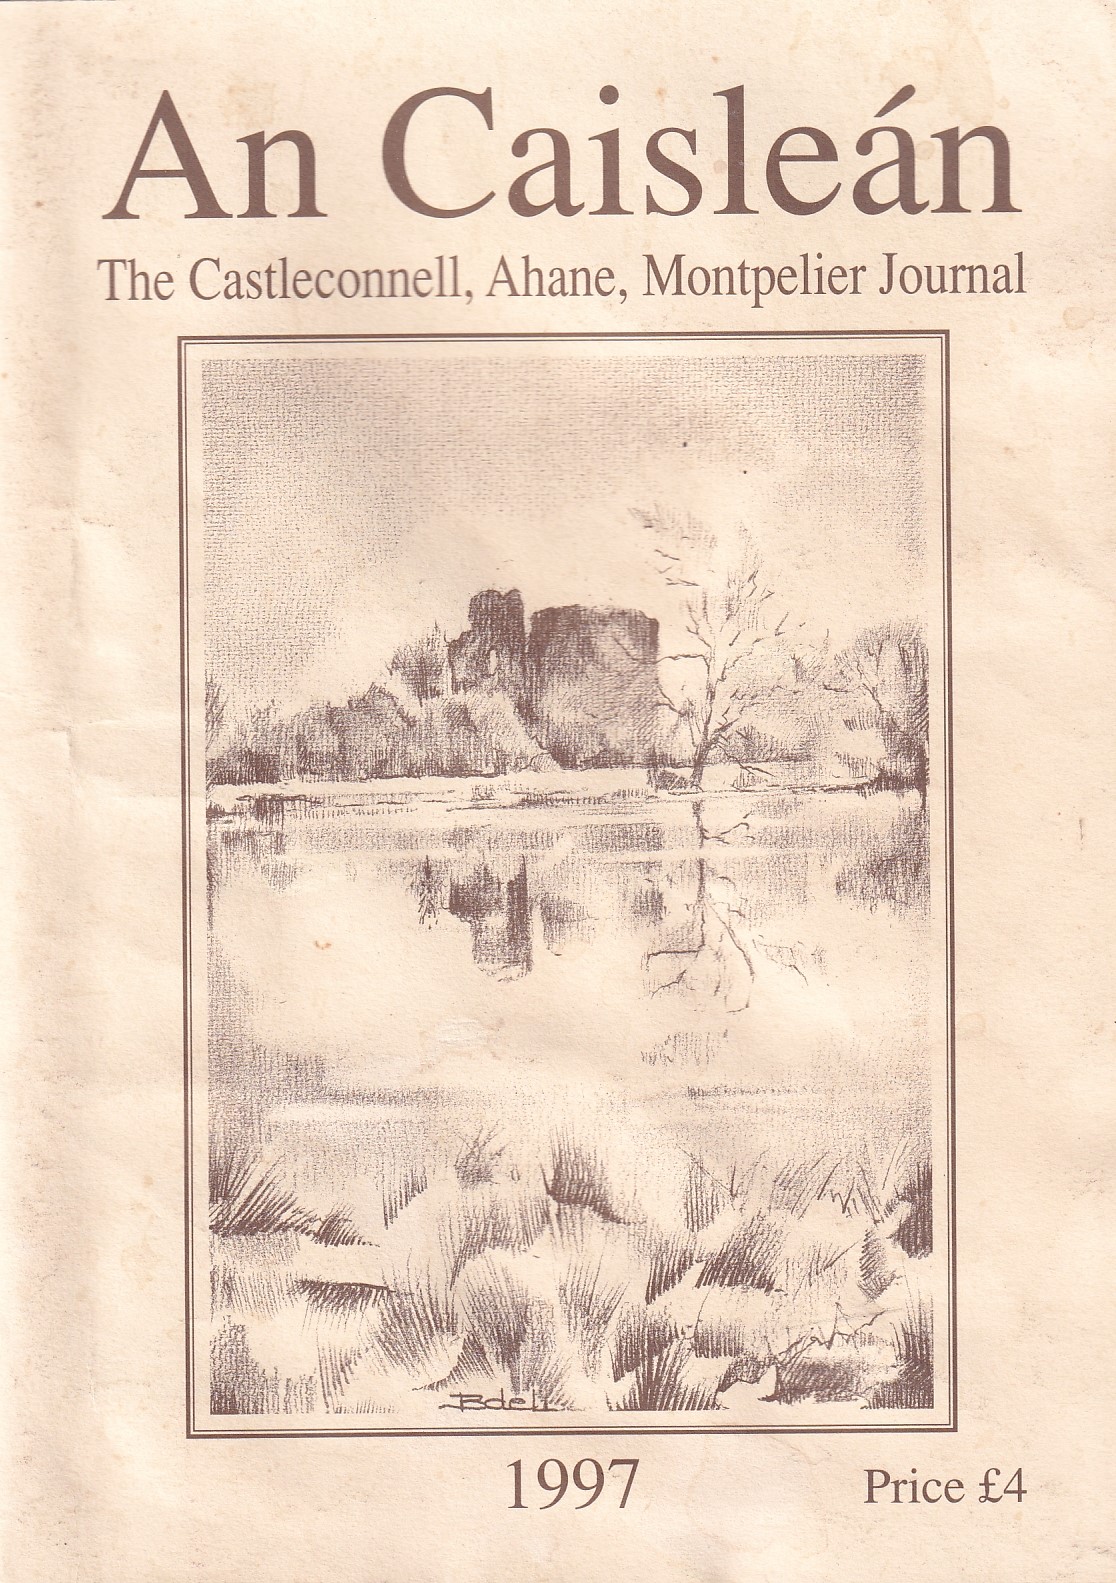 An Caisleán: The Castleconnell, Ahane & Montpelier Journal, 1997 by Various